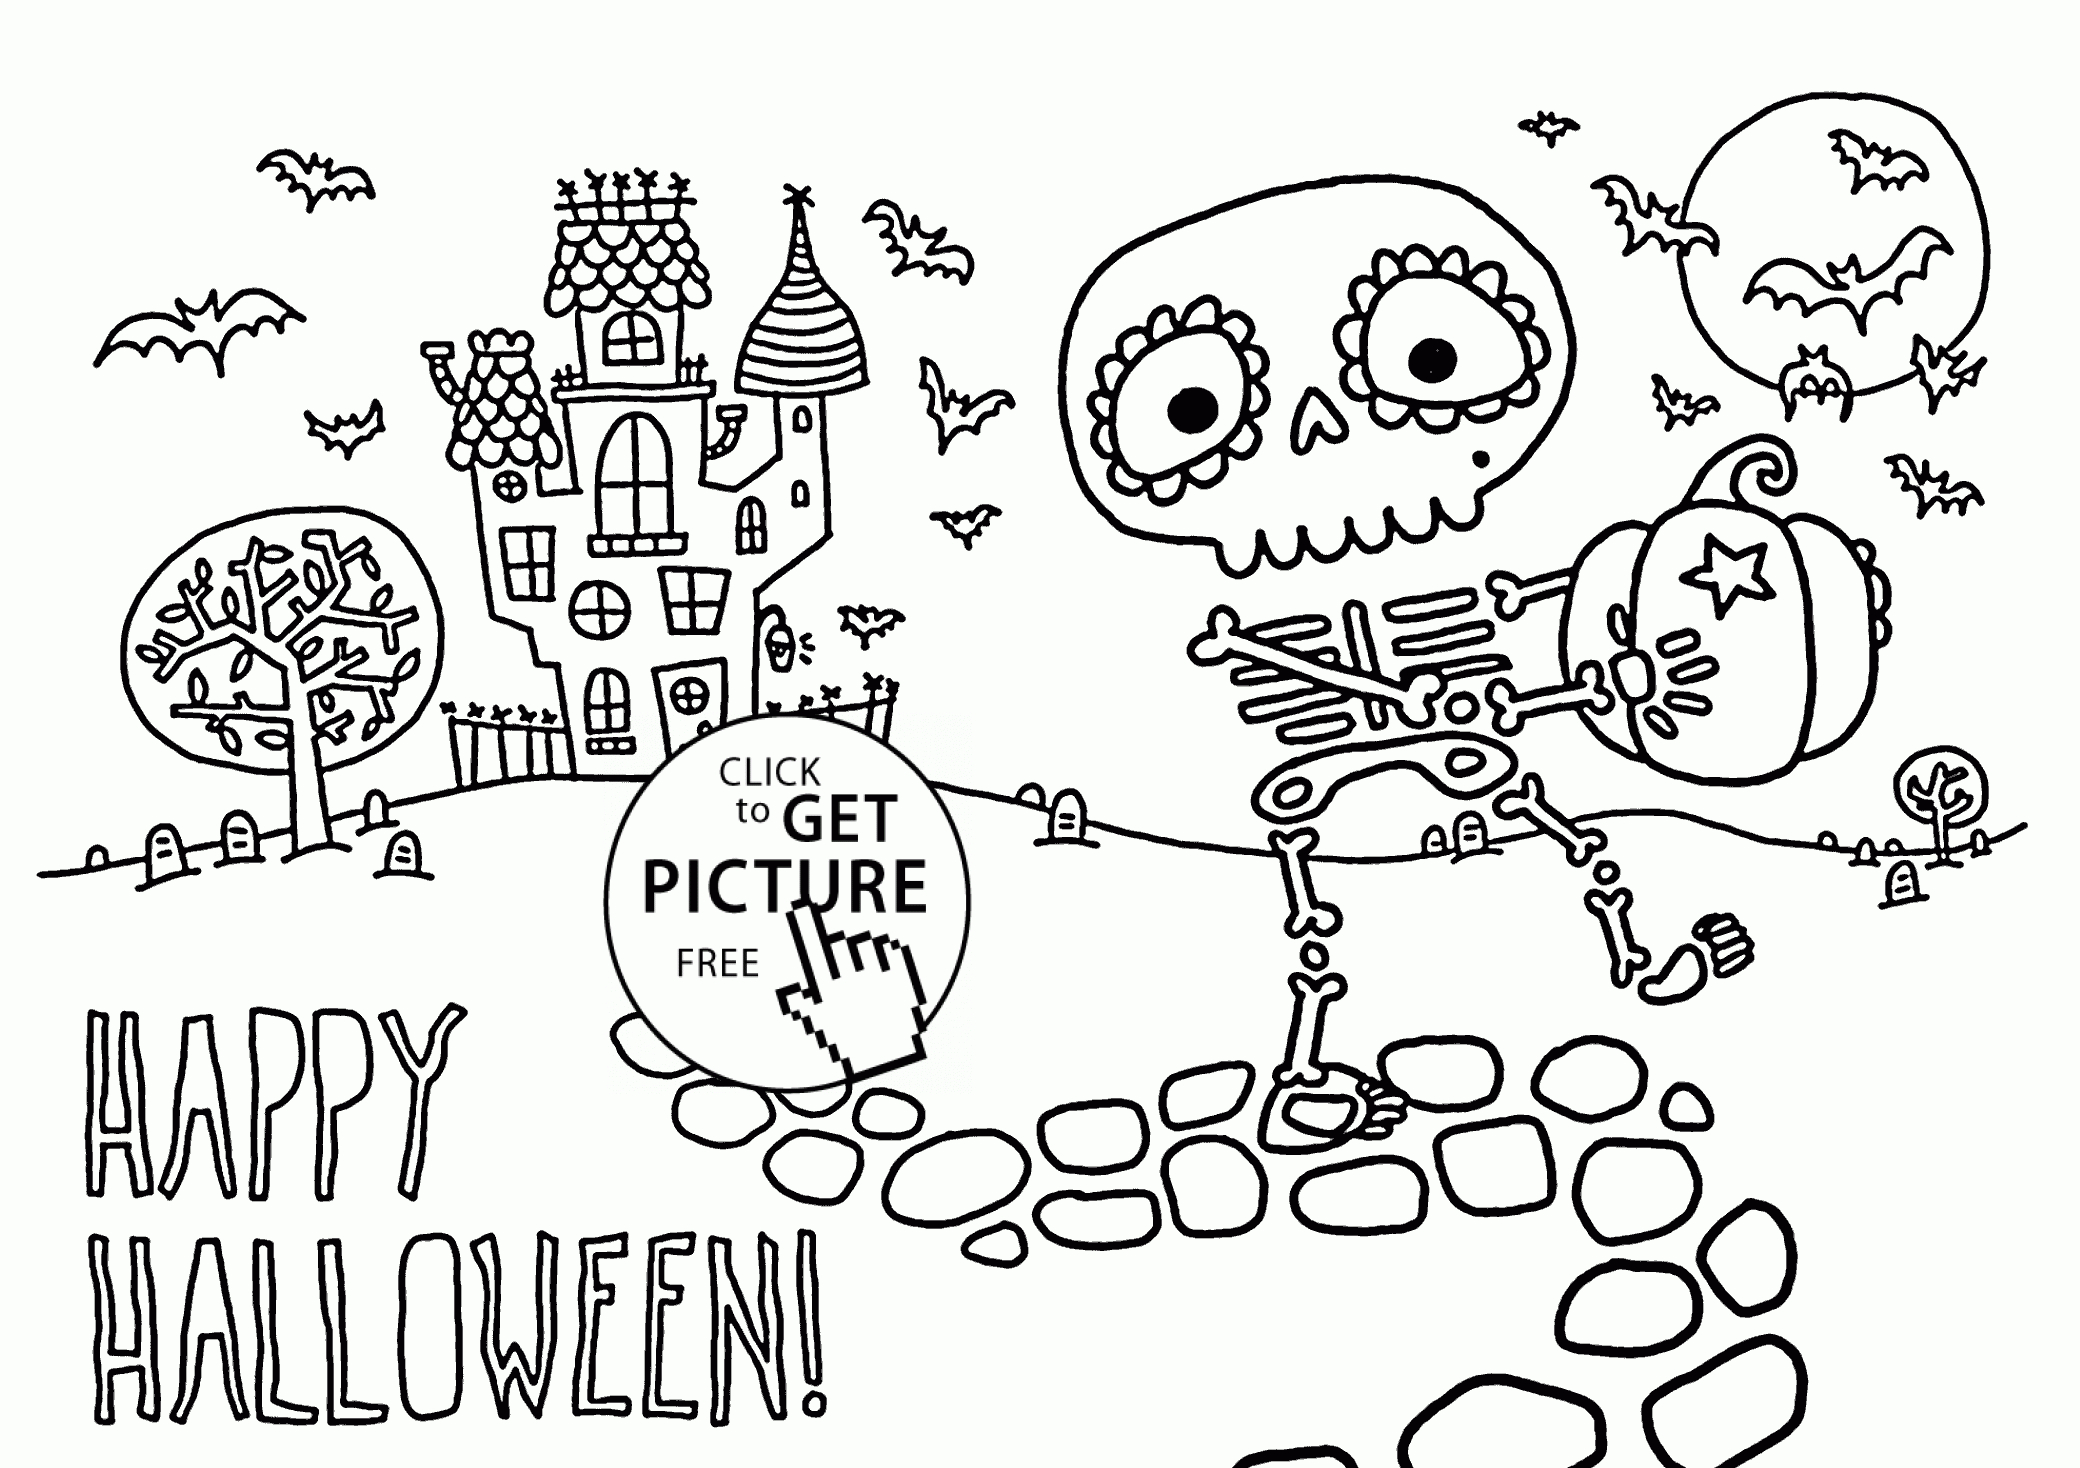 Cute Skeleton Coloring Pages For Kids, Halloween Printables Free - Free Printable Skeleton Coloring Pages